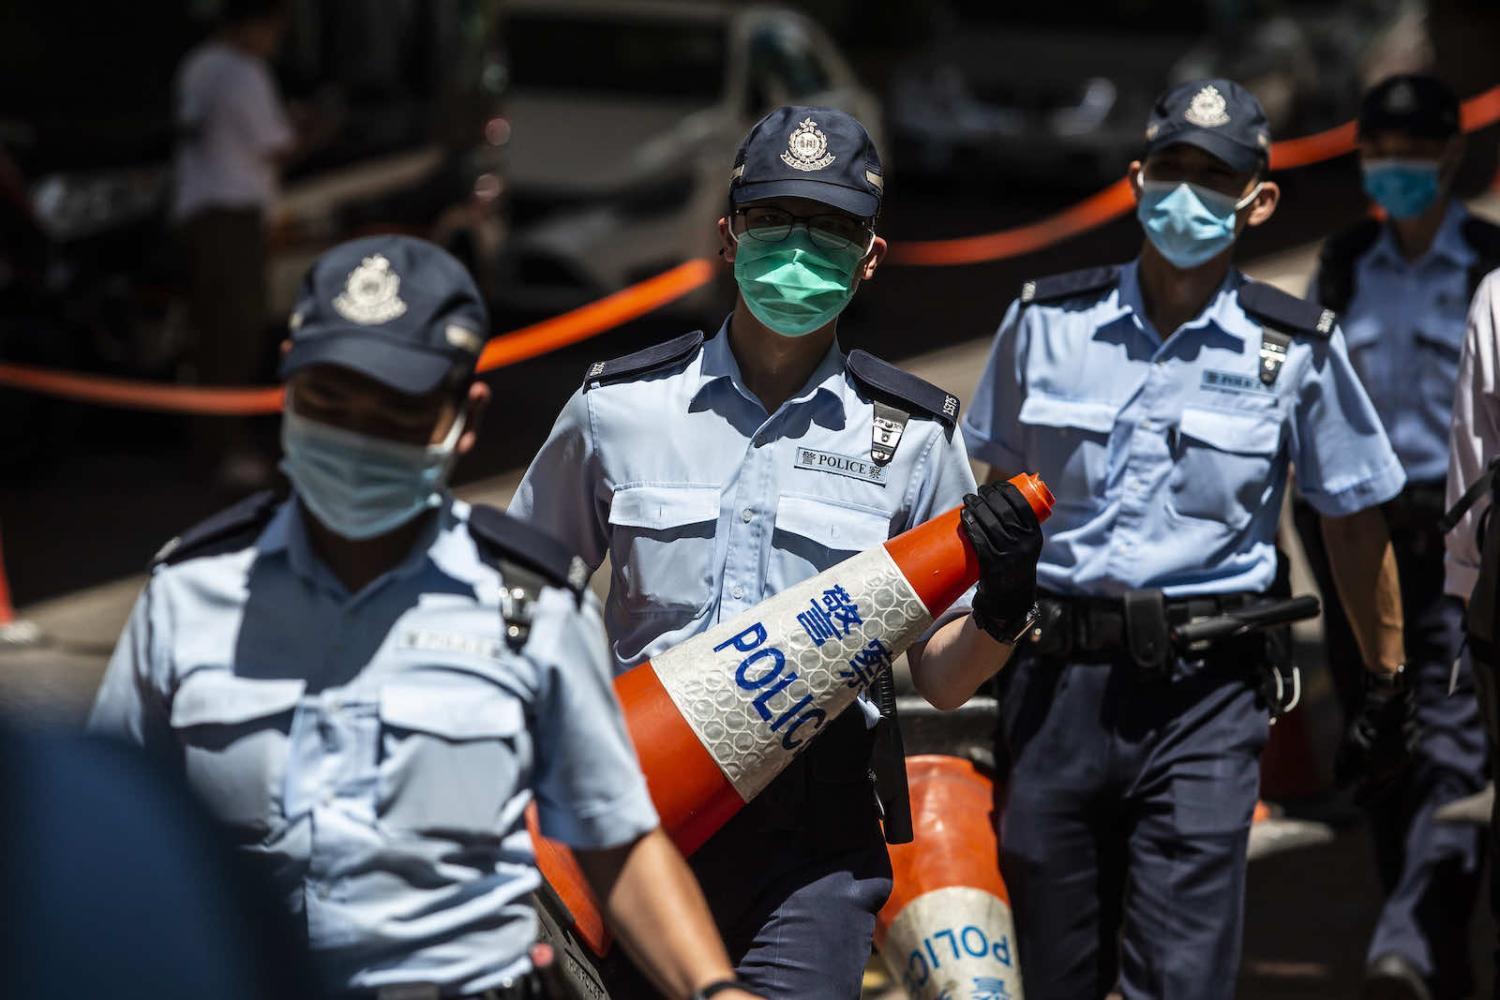 Police set up a cordon outside West Kowloon court in Hong Kong on 6 July (Isaac Lawrence/AFP via Getty Images)